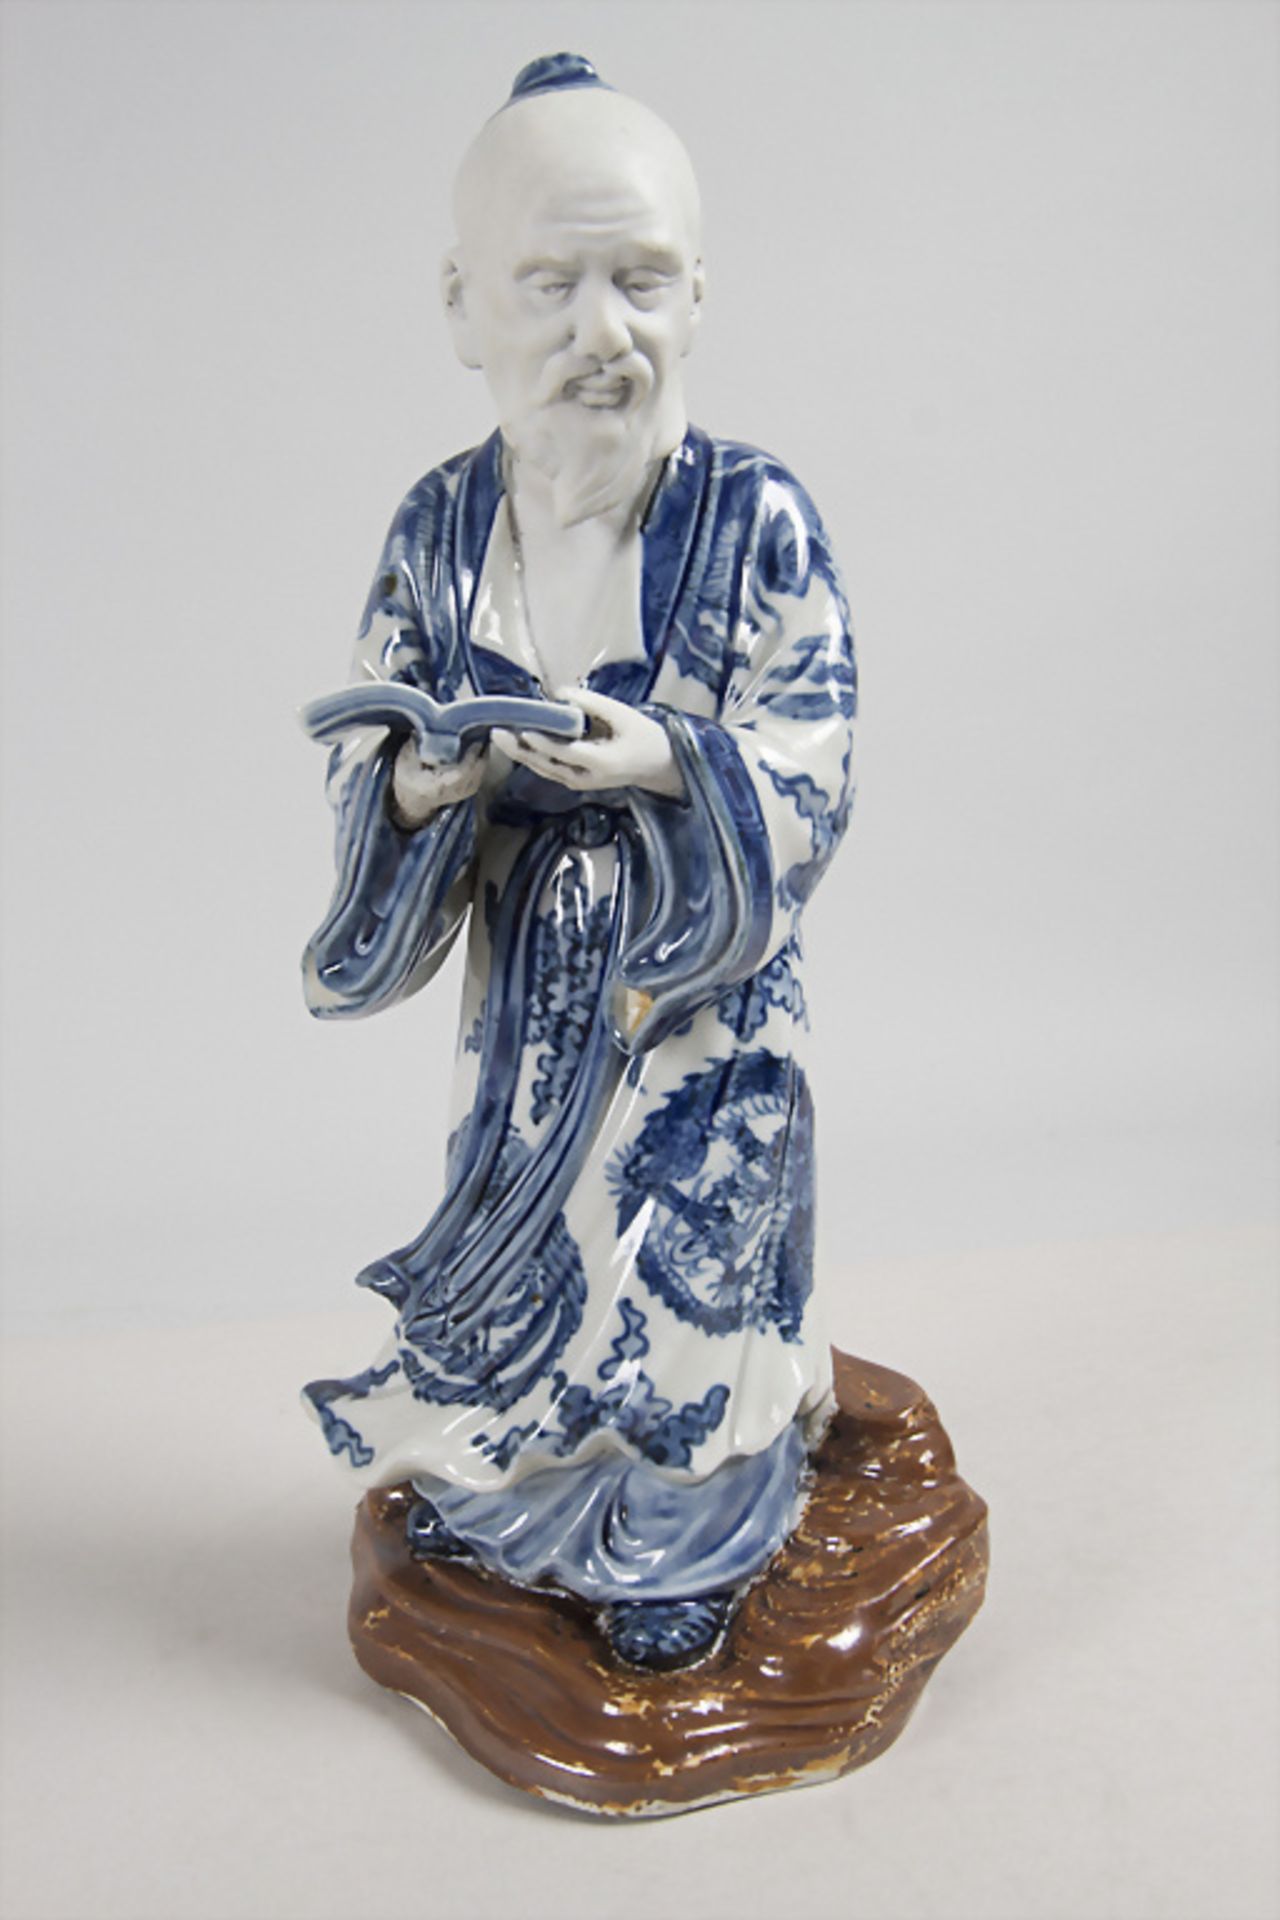 Konfuzius / A figure of Confuzius, China, Qing Dynastie (1644-1911), wohl K'ang Hsi- Periode ...